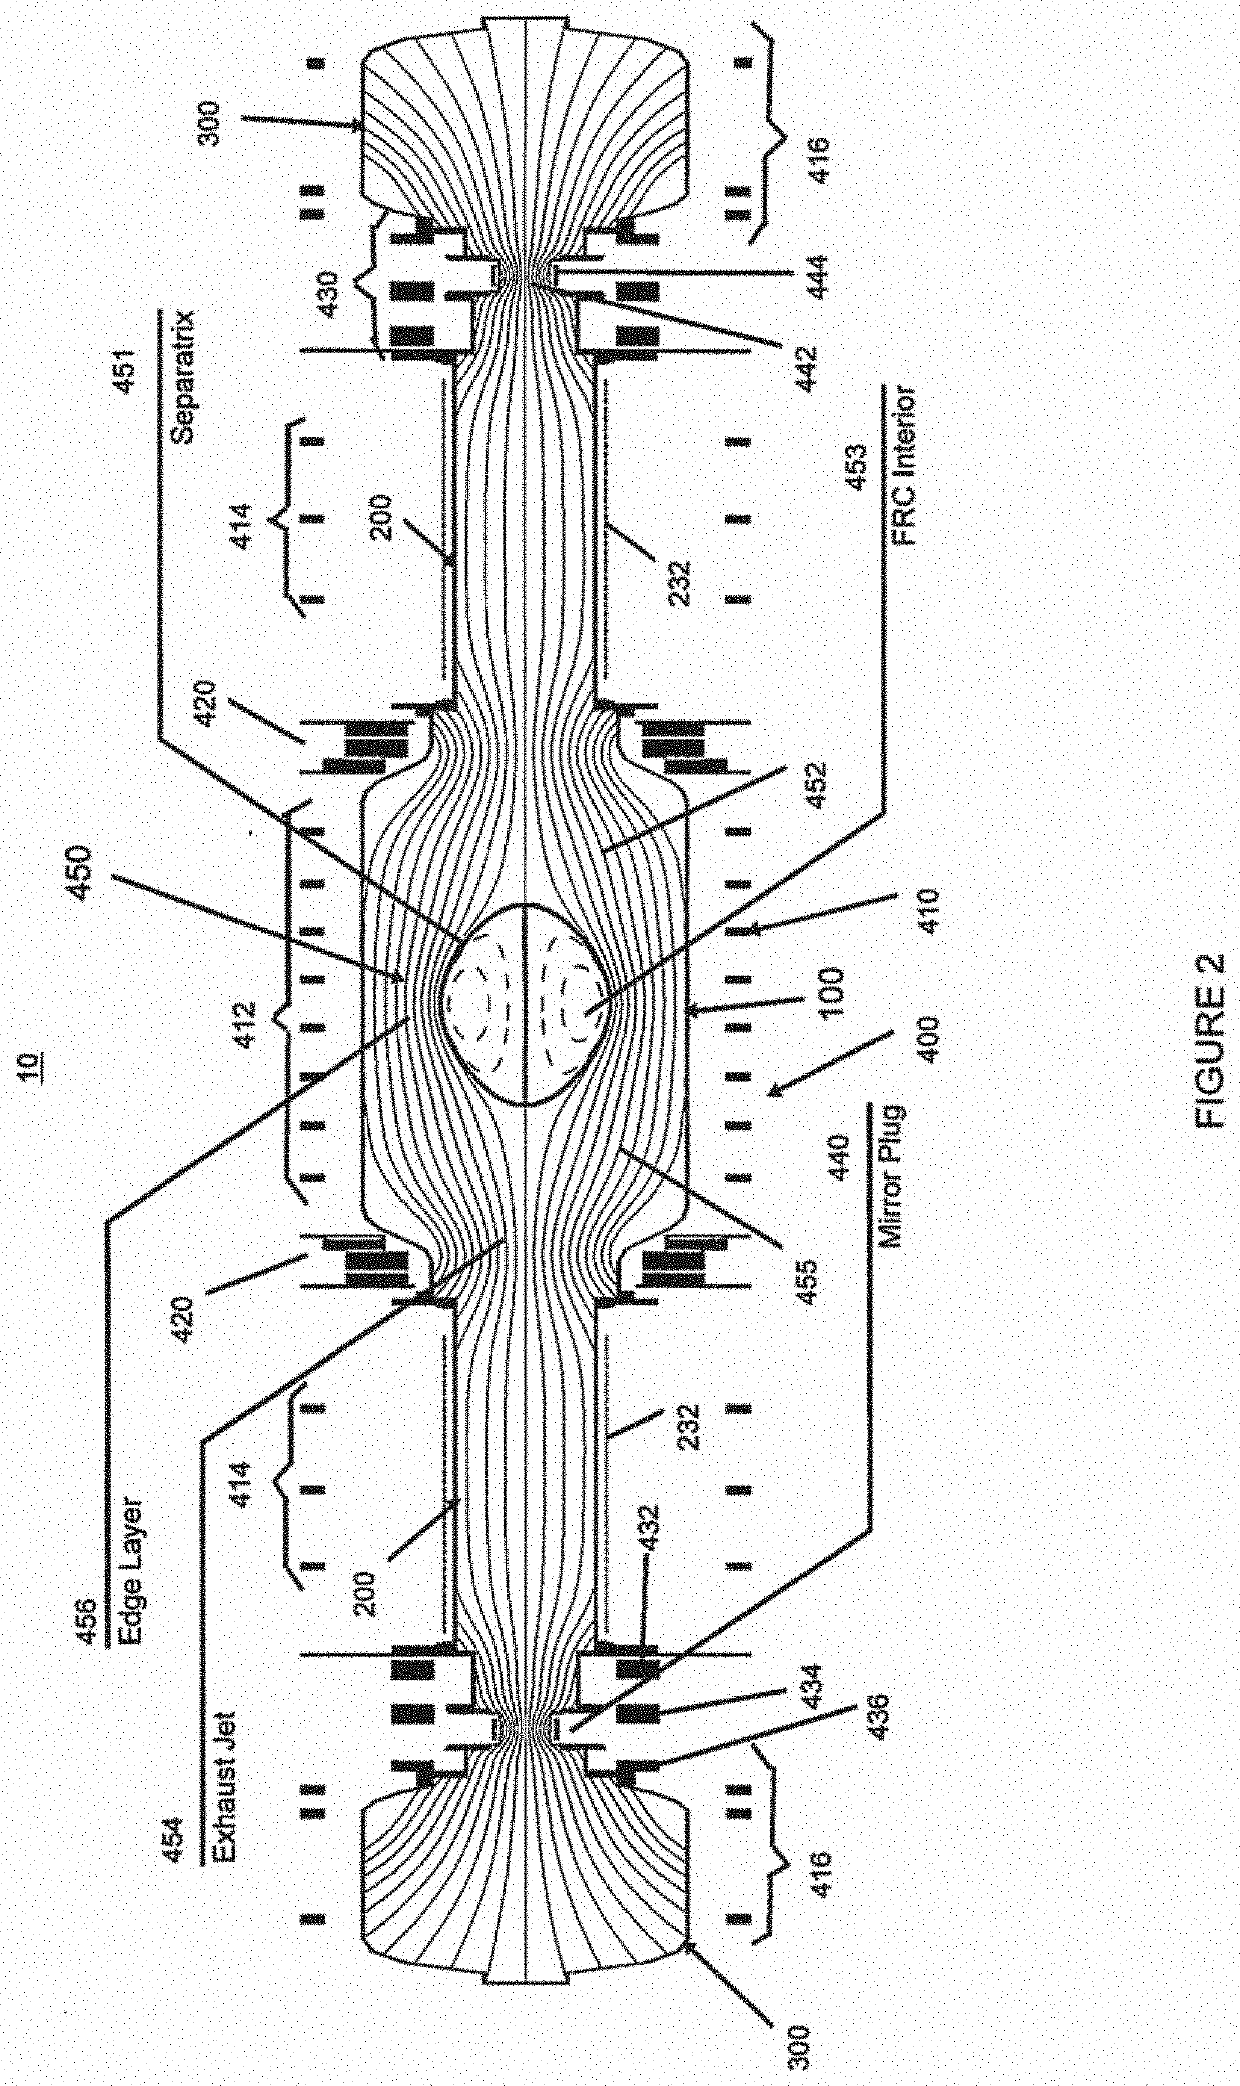 Systems and methods for forming and maintaining a high performance frc